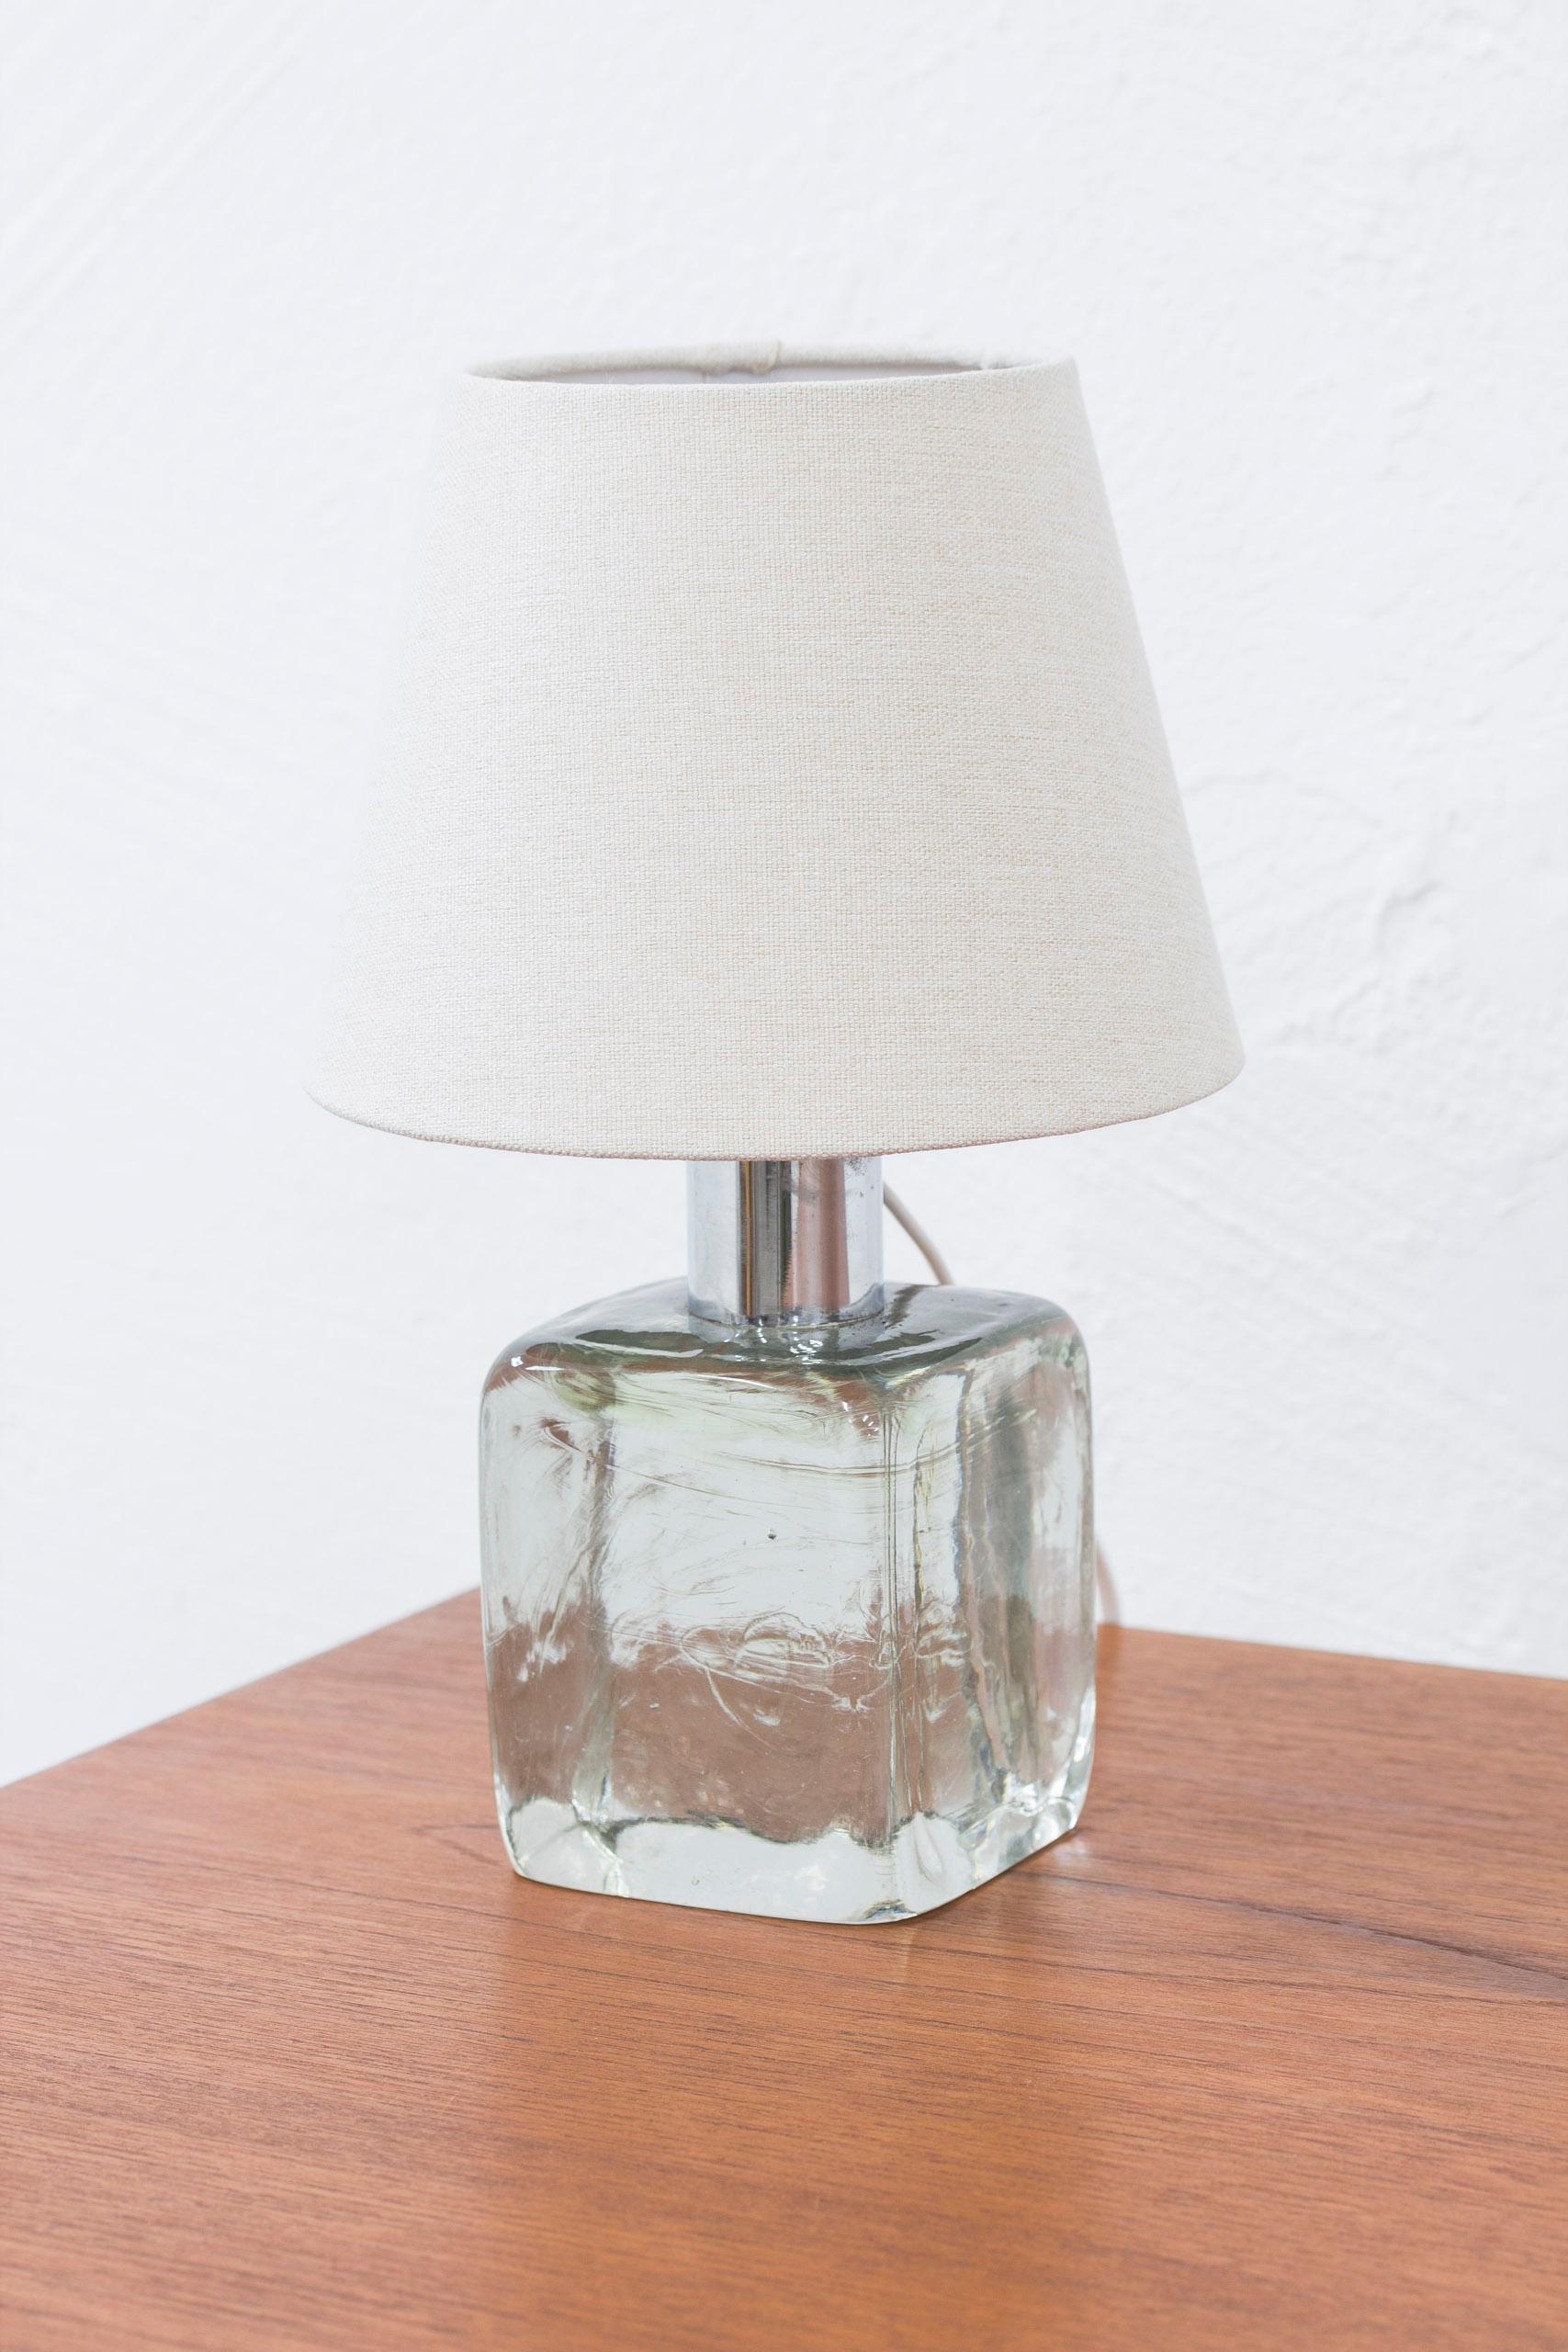 Early example of table lamp model 1819 designed by Josef Frank. Produced in Sweden by Svenskt Tenn, the glass mold blown by Reijmyre. This example made during the 1930s with porcelain fitting and turn light switch as well as nickel plated brass